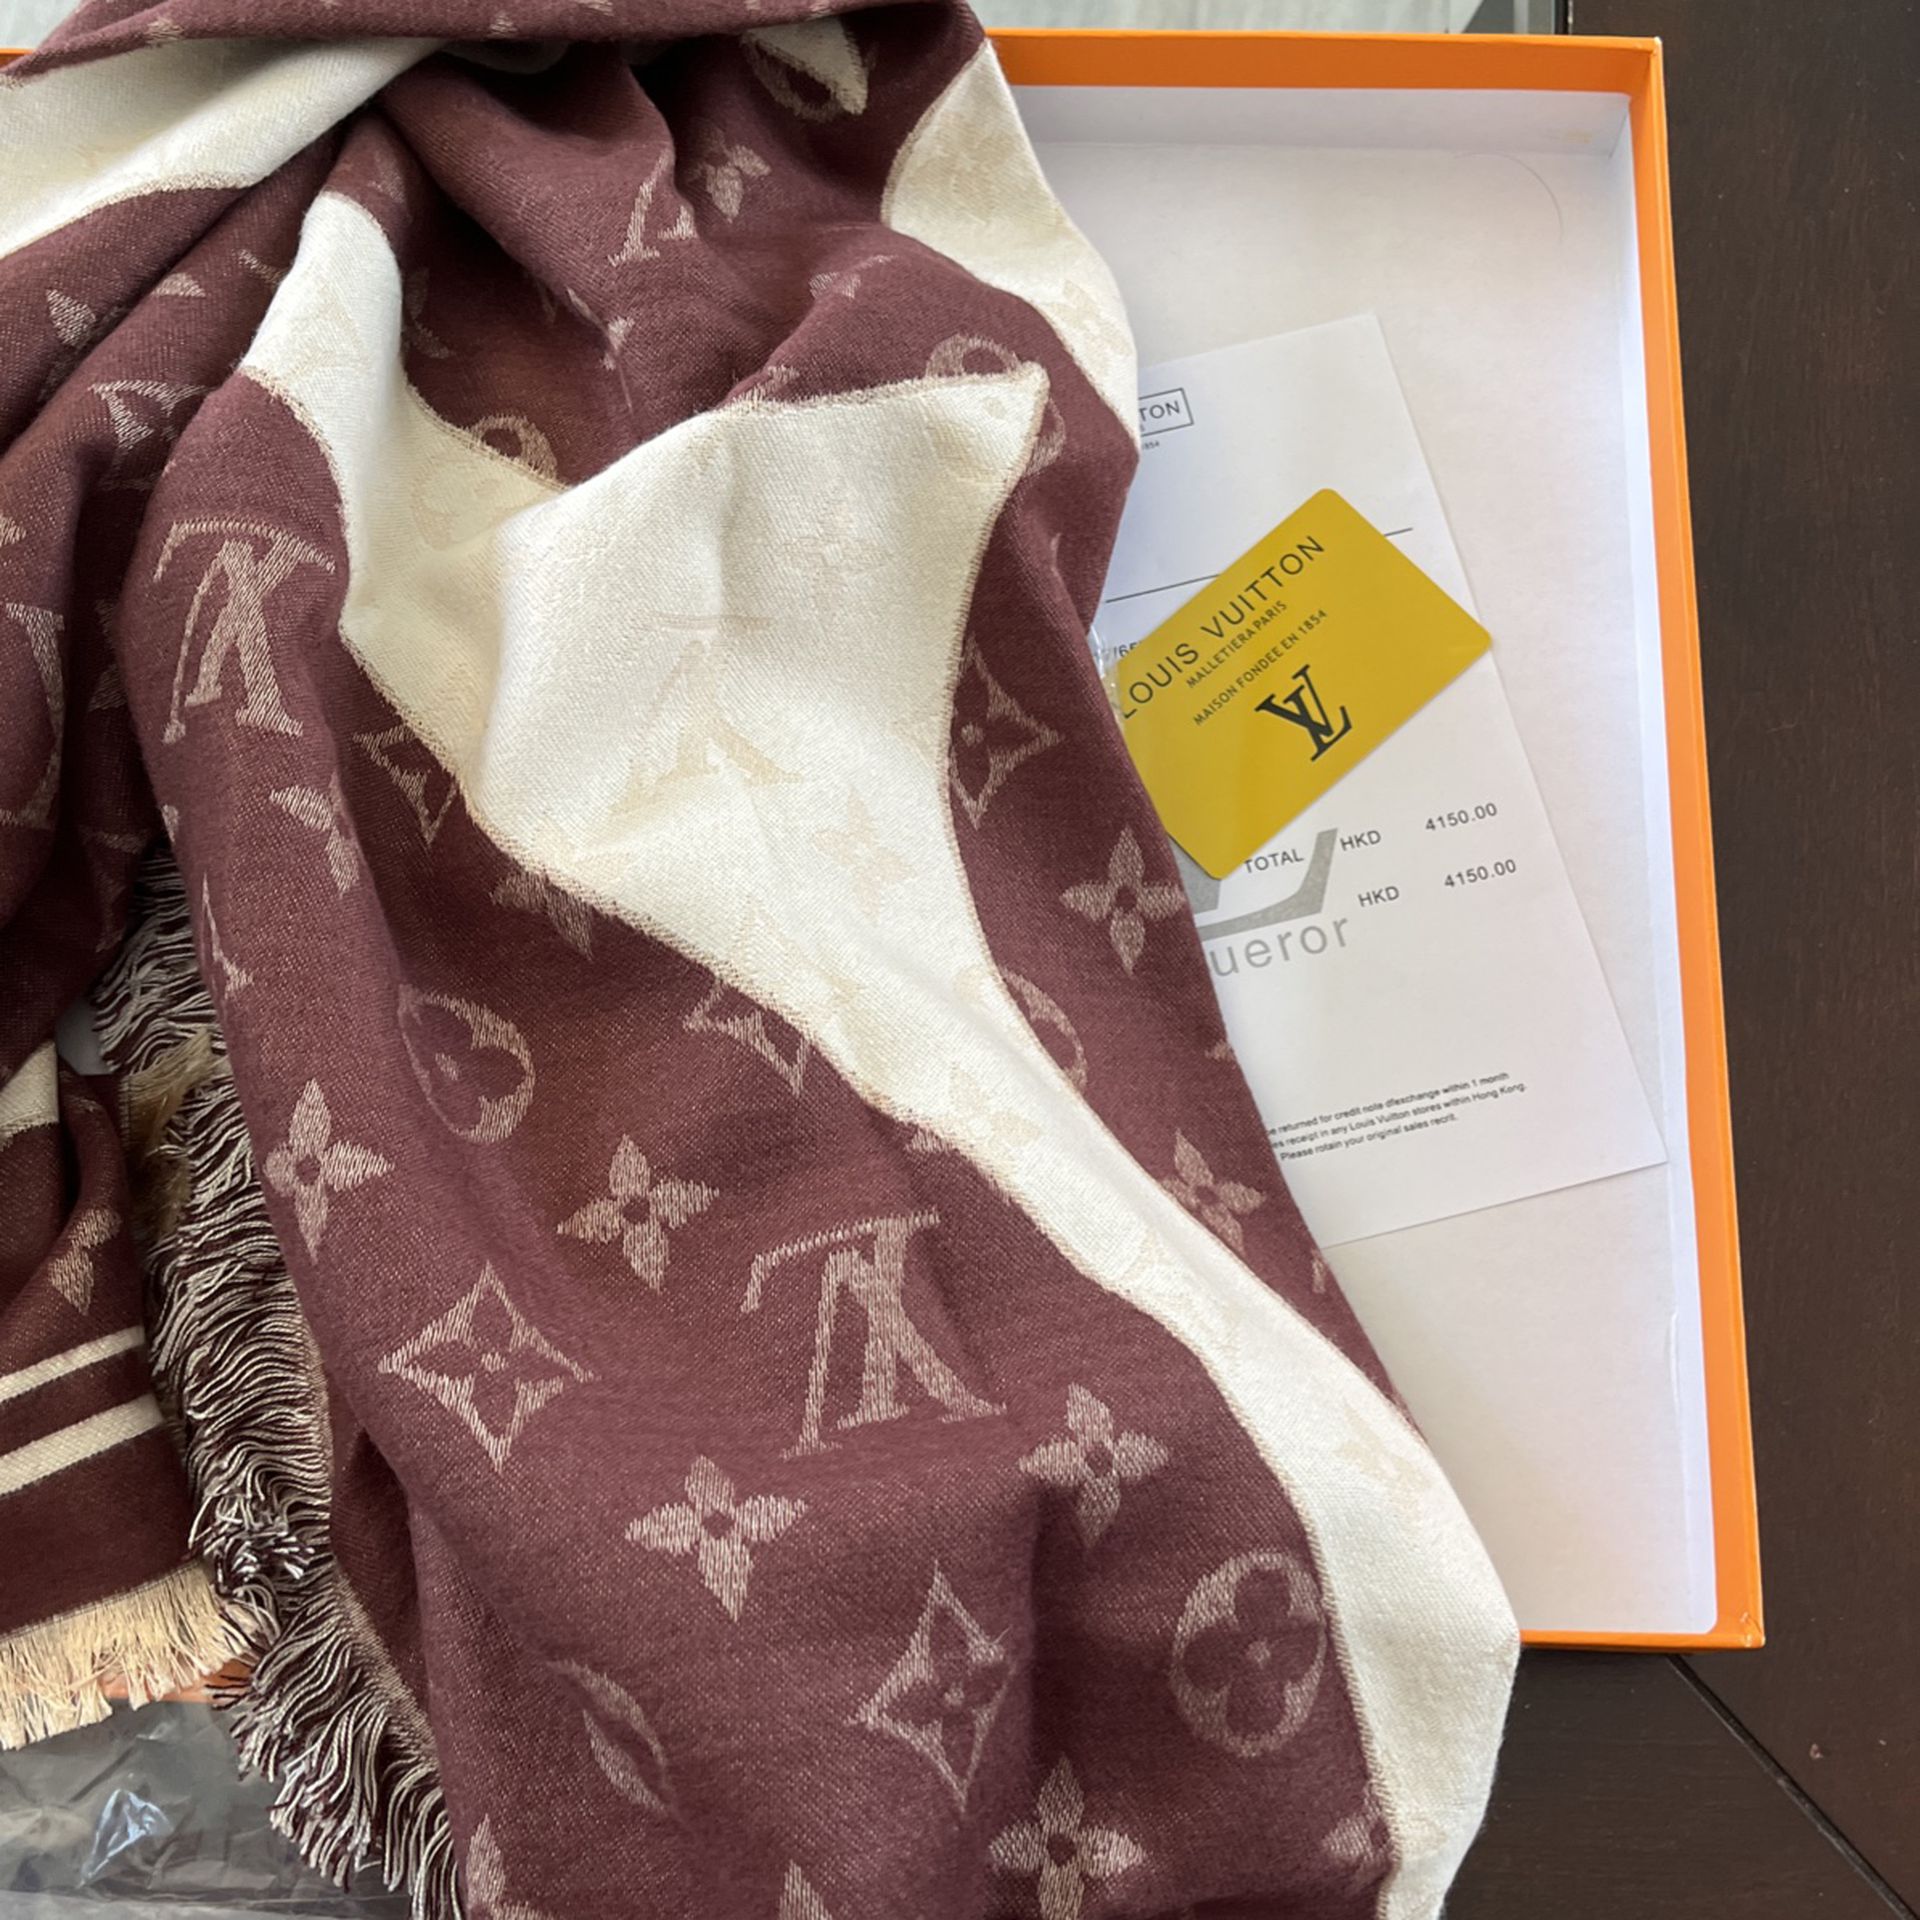 Louis Vuitton Scarves for sale in Los Angeles, California